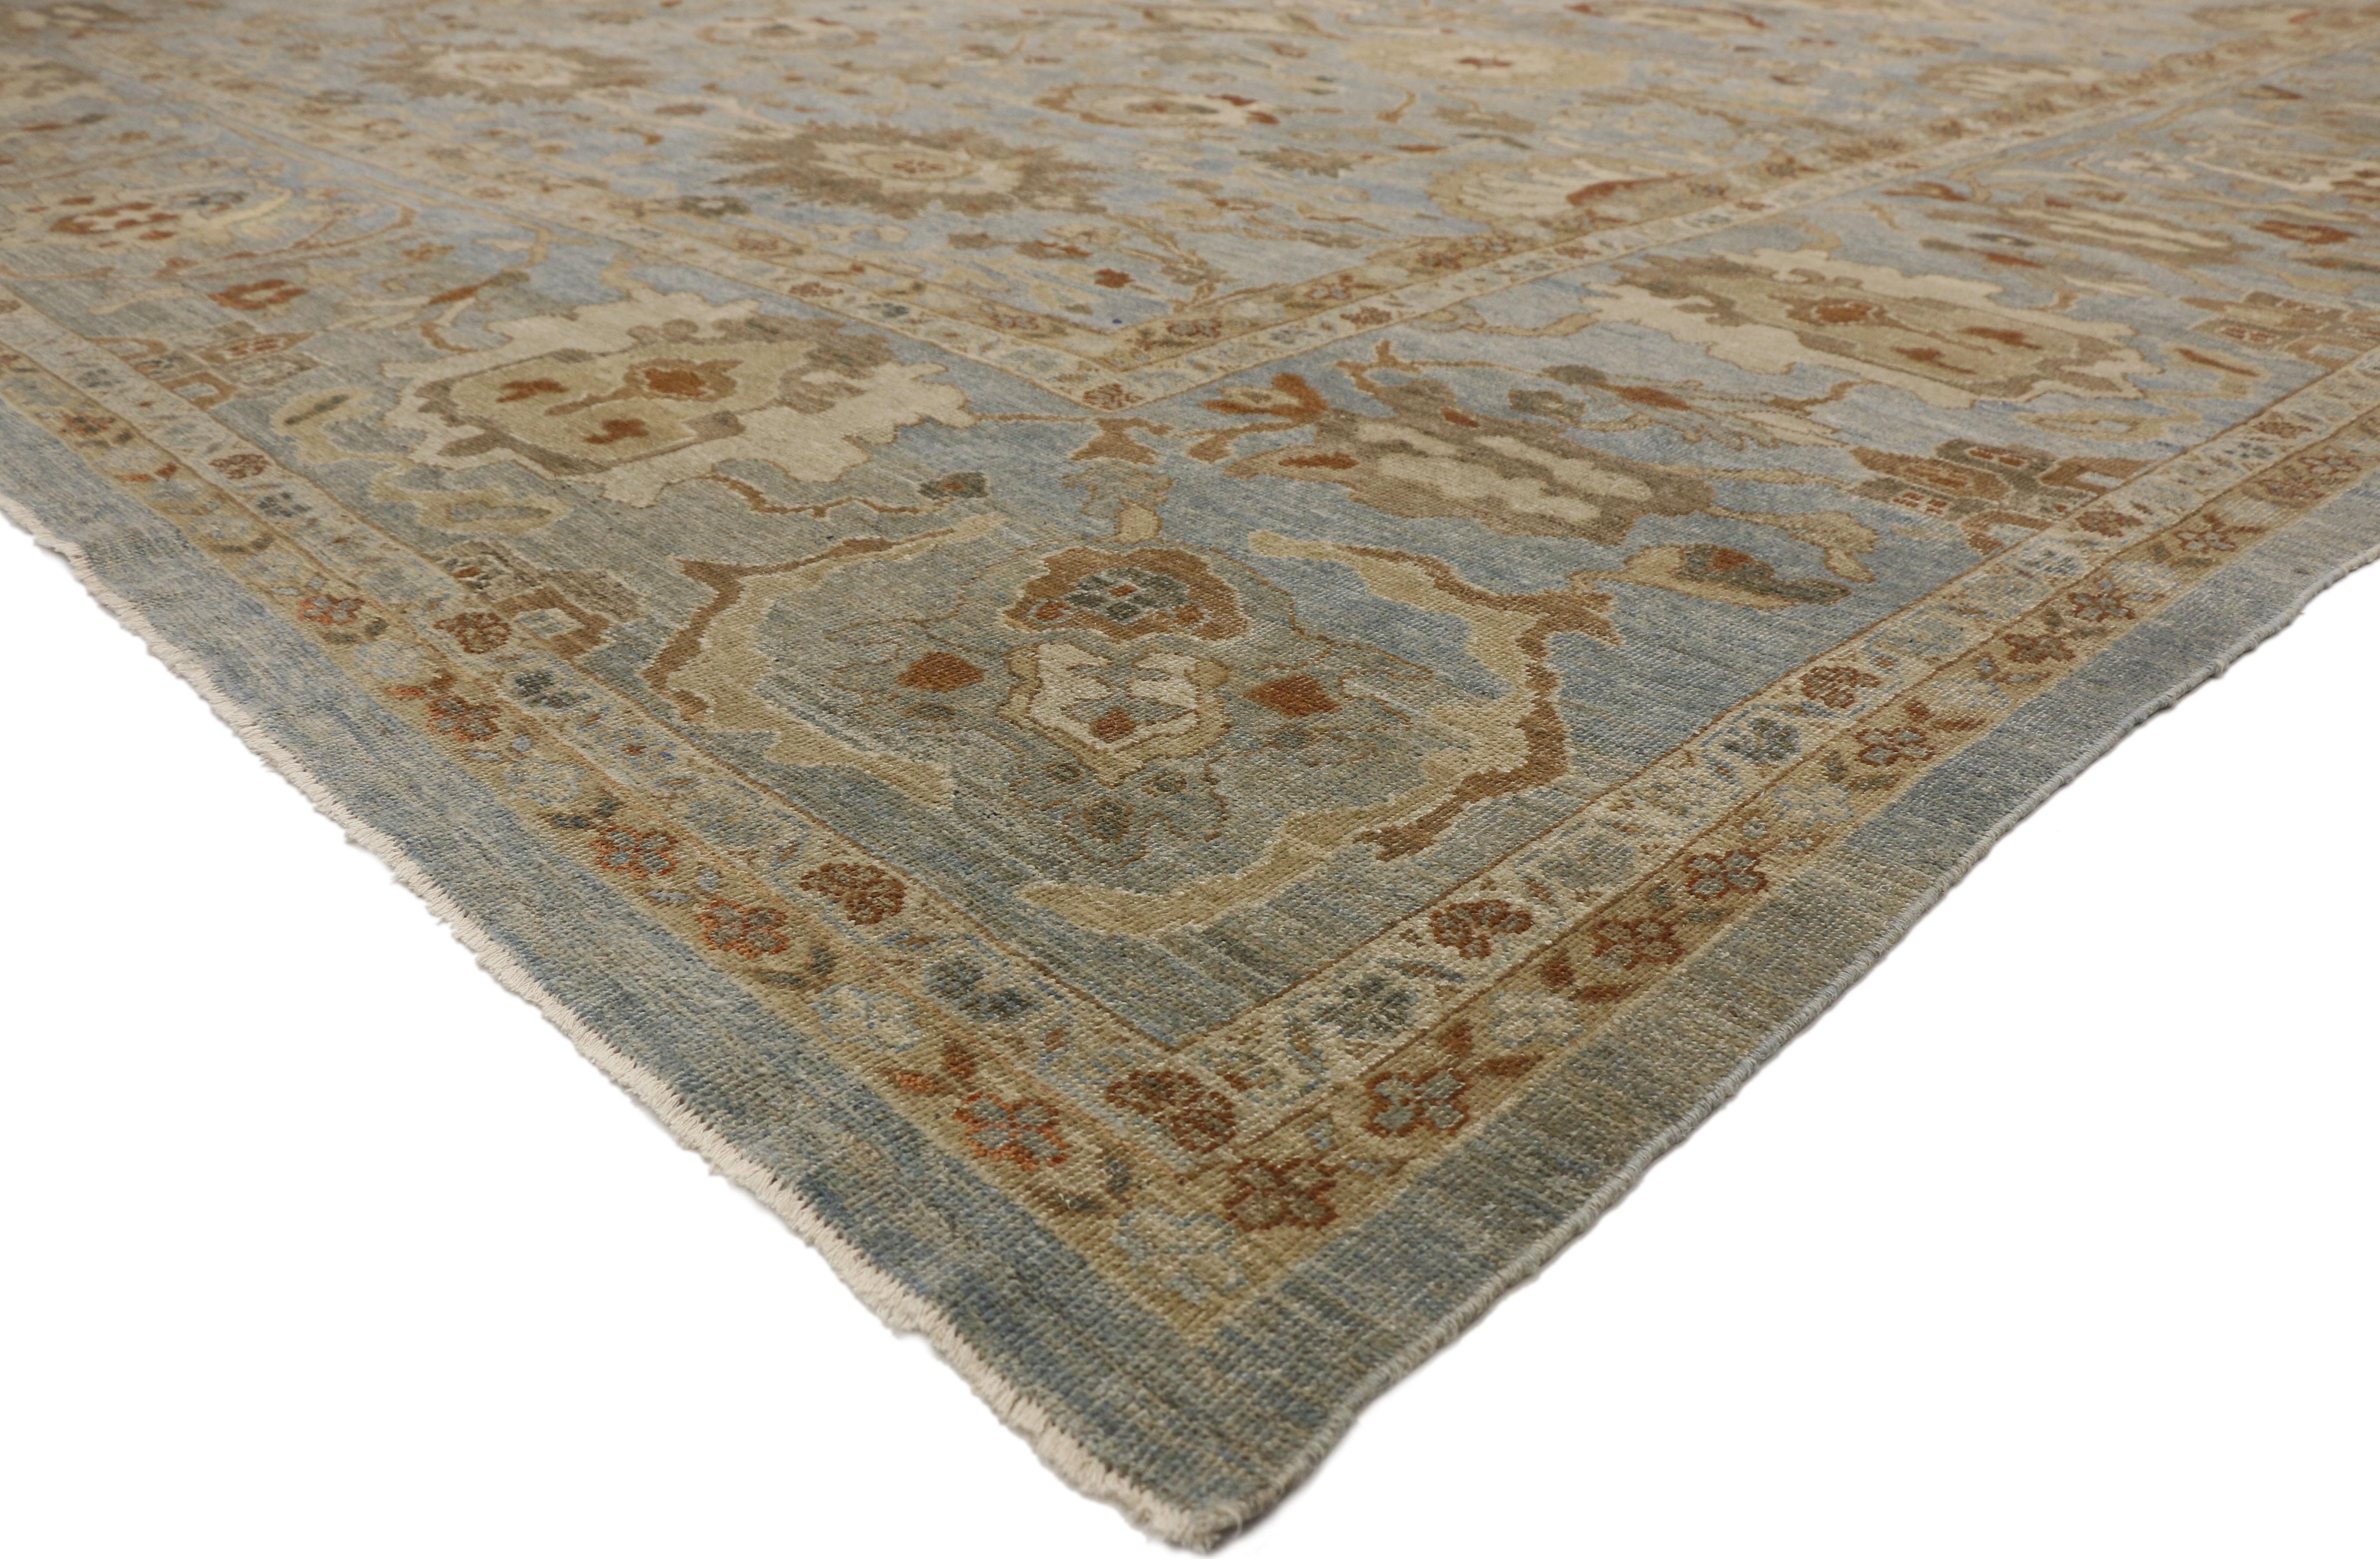 77298 New Transitional Persian Sultanabad Palace Rug with Neoclassic Style. With transitional style and harmonious hues, this transitional Persian Sultanabad palace size rug is sophisticated and subtle without sacrificing elegance. The Persian